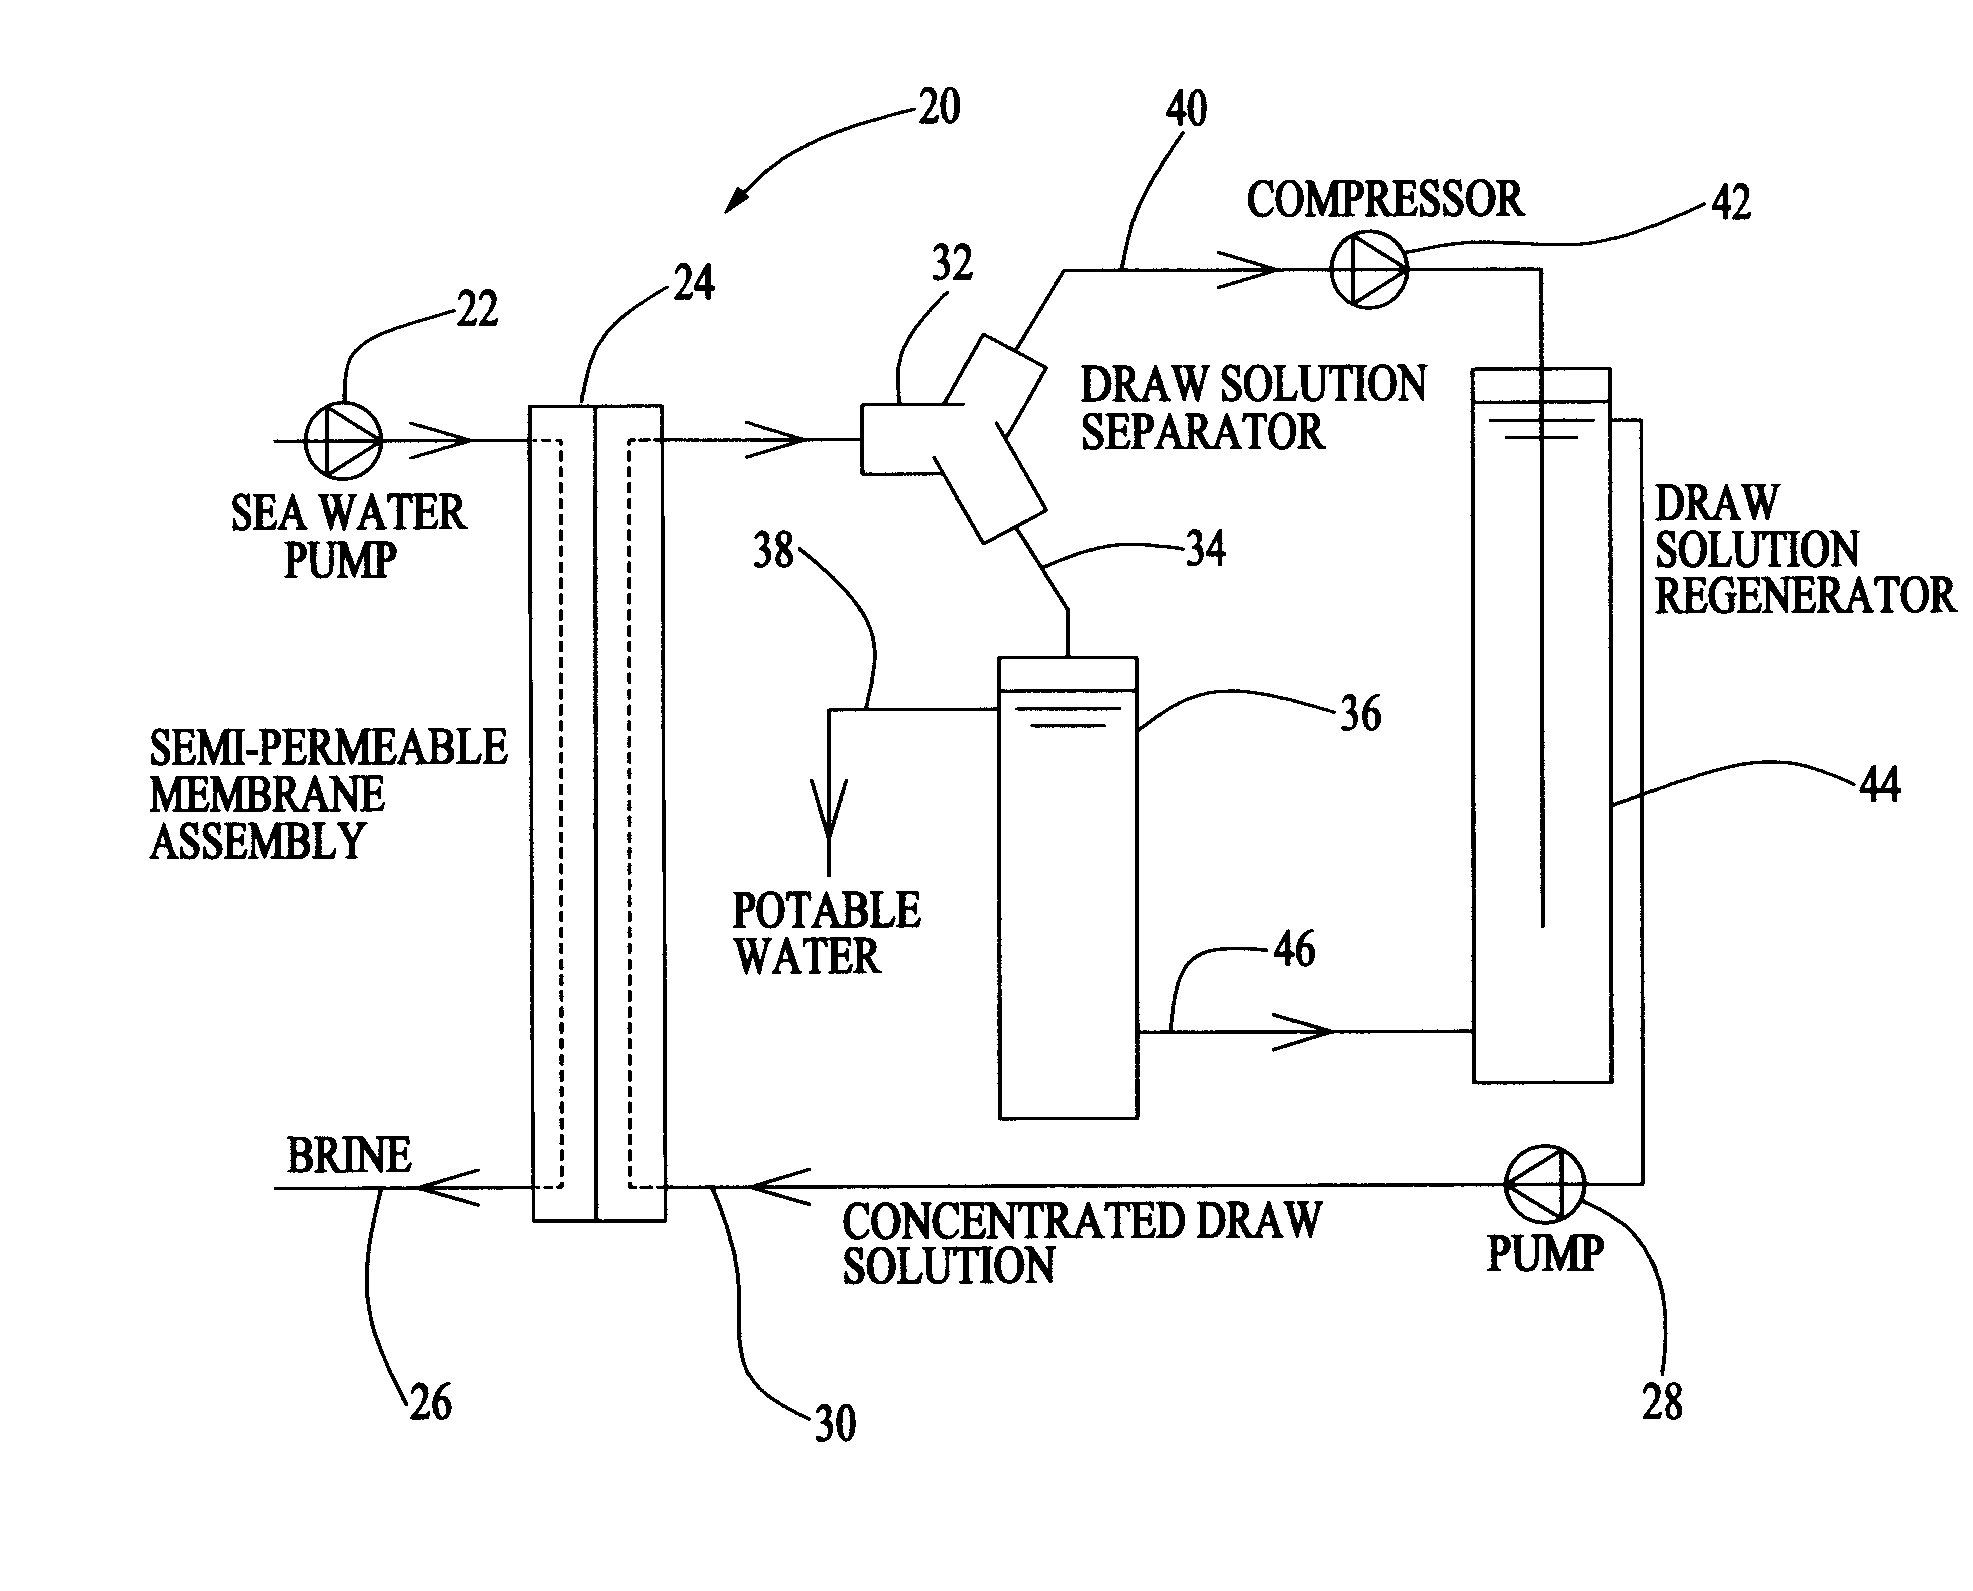 Method and Apparatus for Producing Potable Water from Seawater Using Forward Osmosis